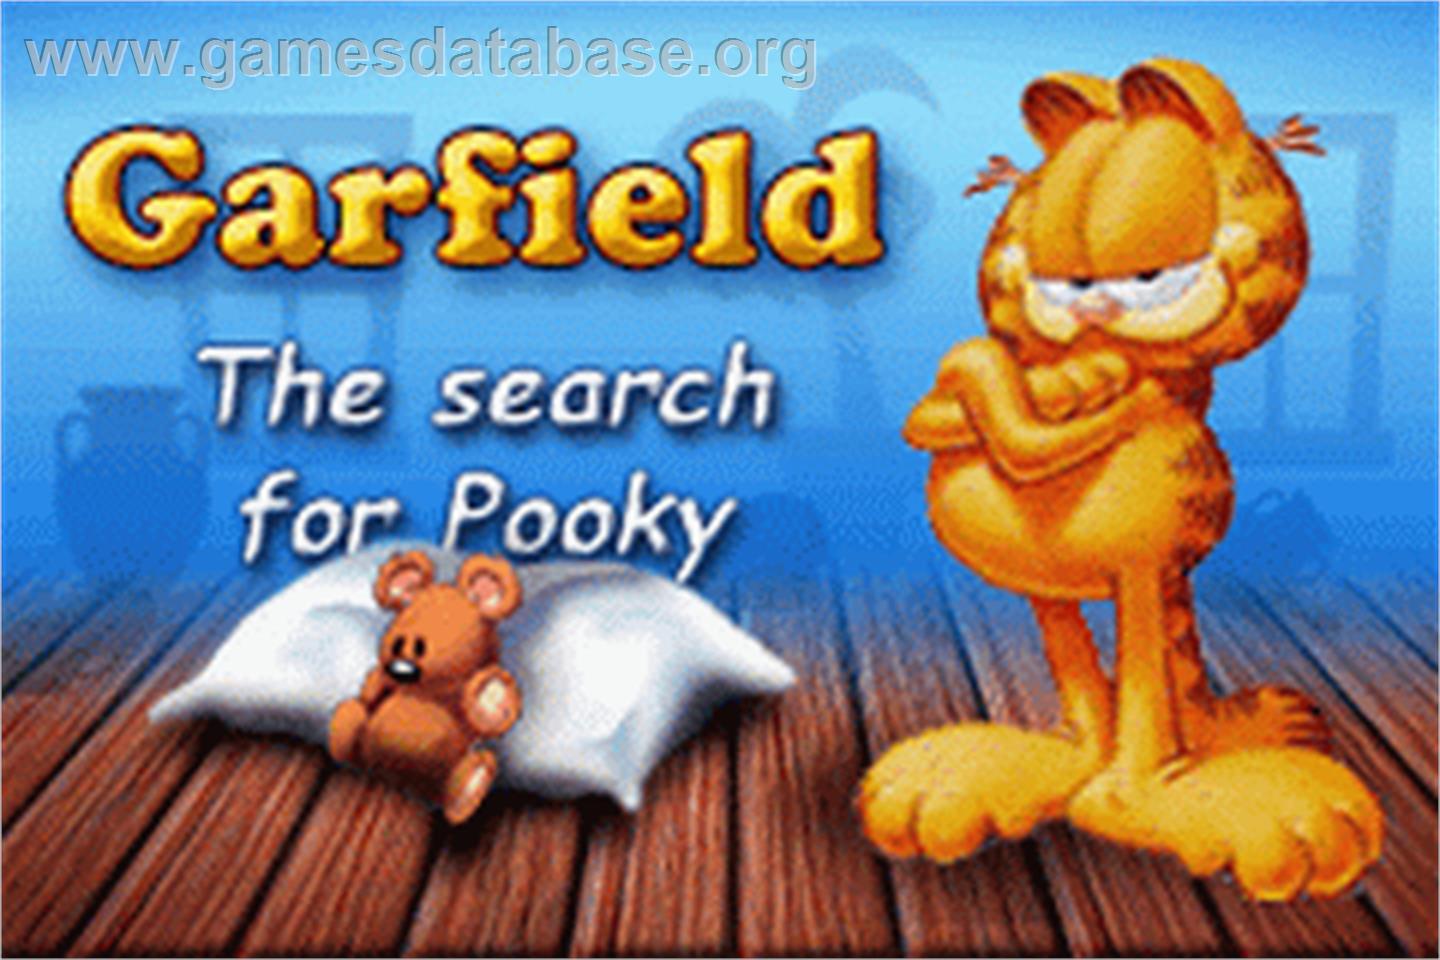 Garfield: The Search for Pooky - Nintendo Game Boy Advance - Artwork - Title Screen